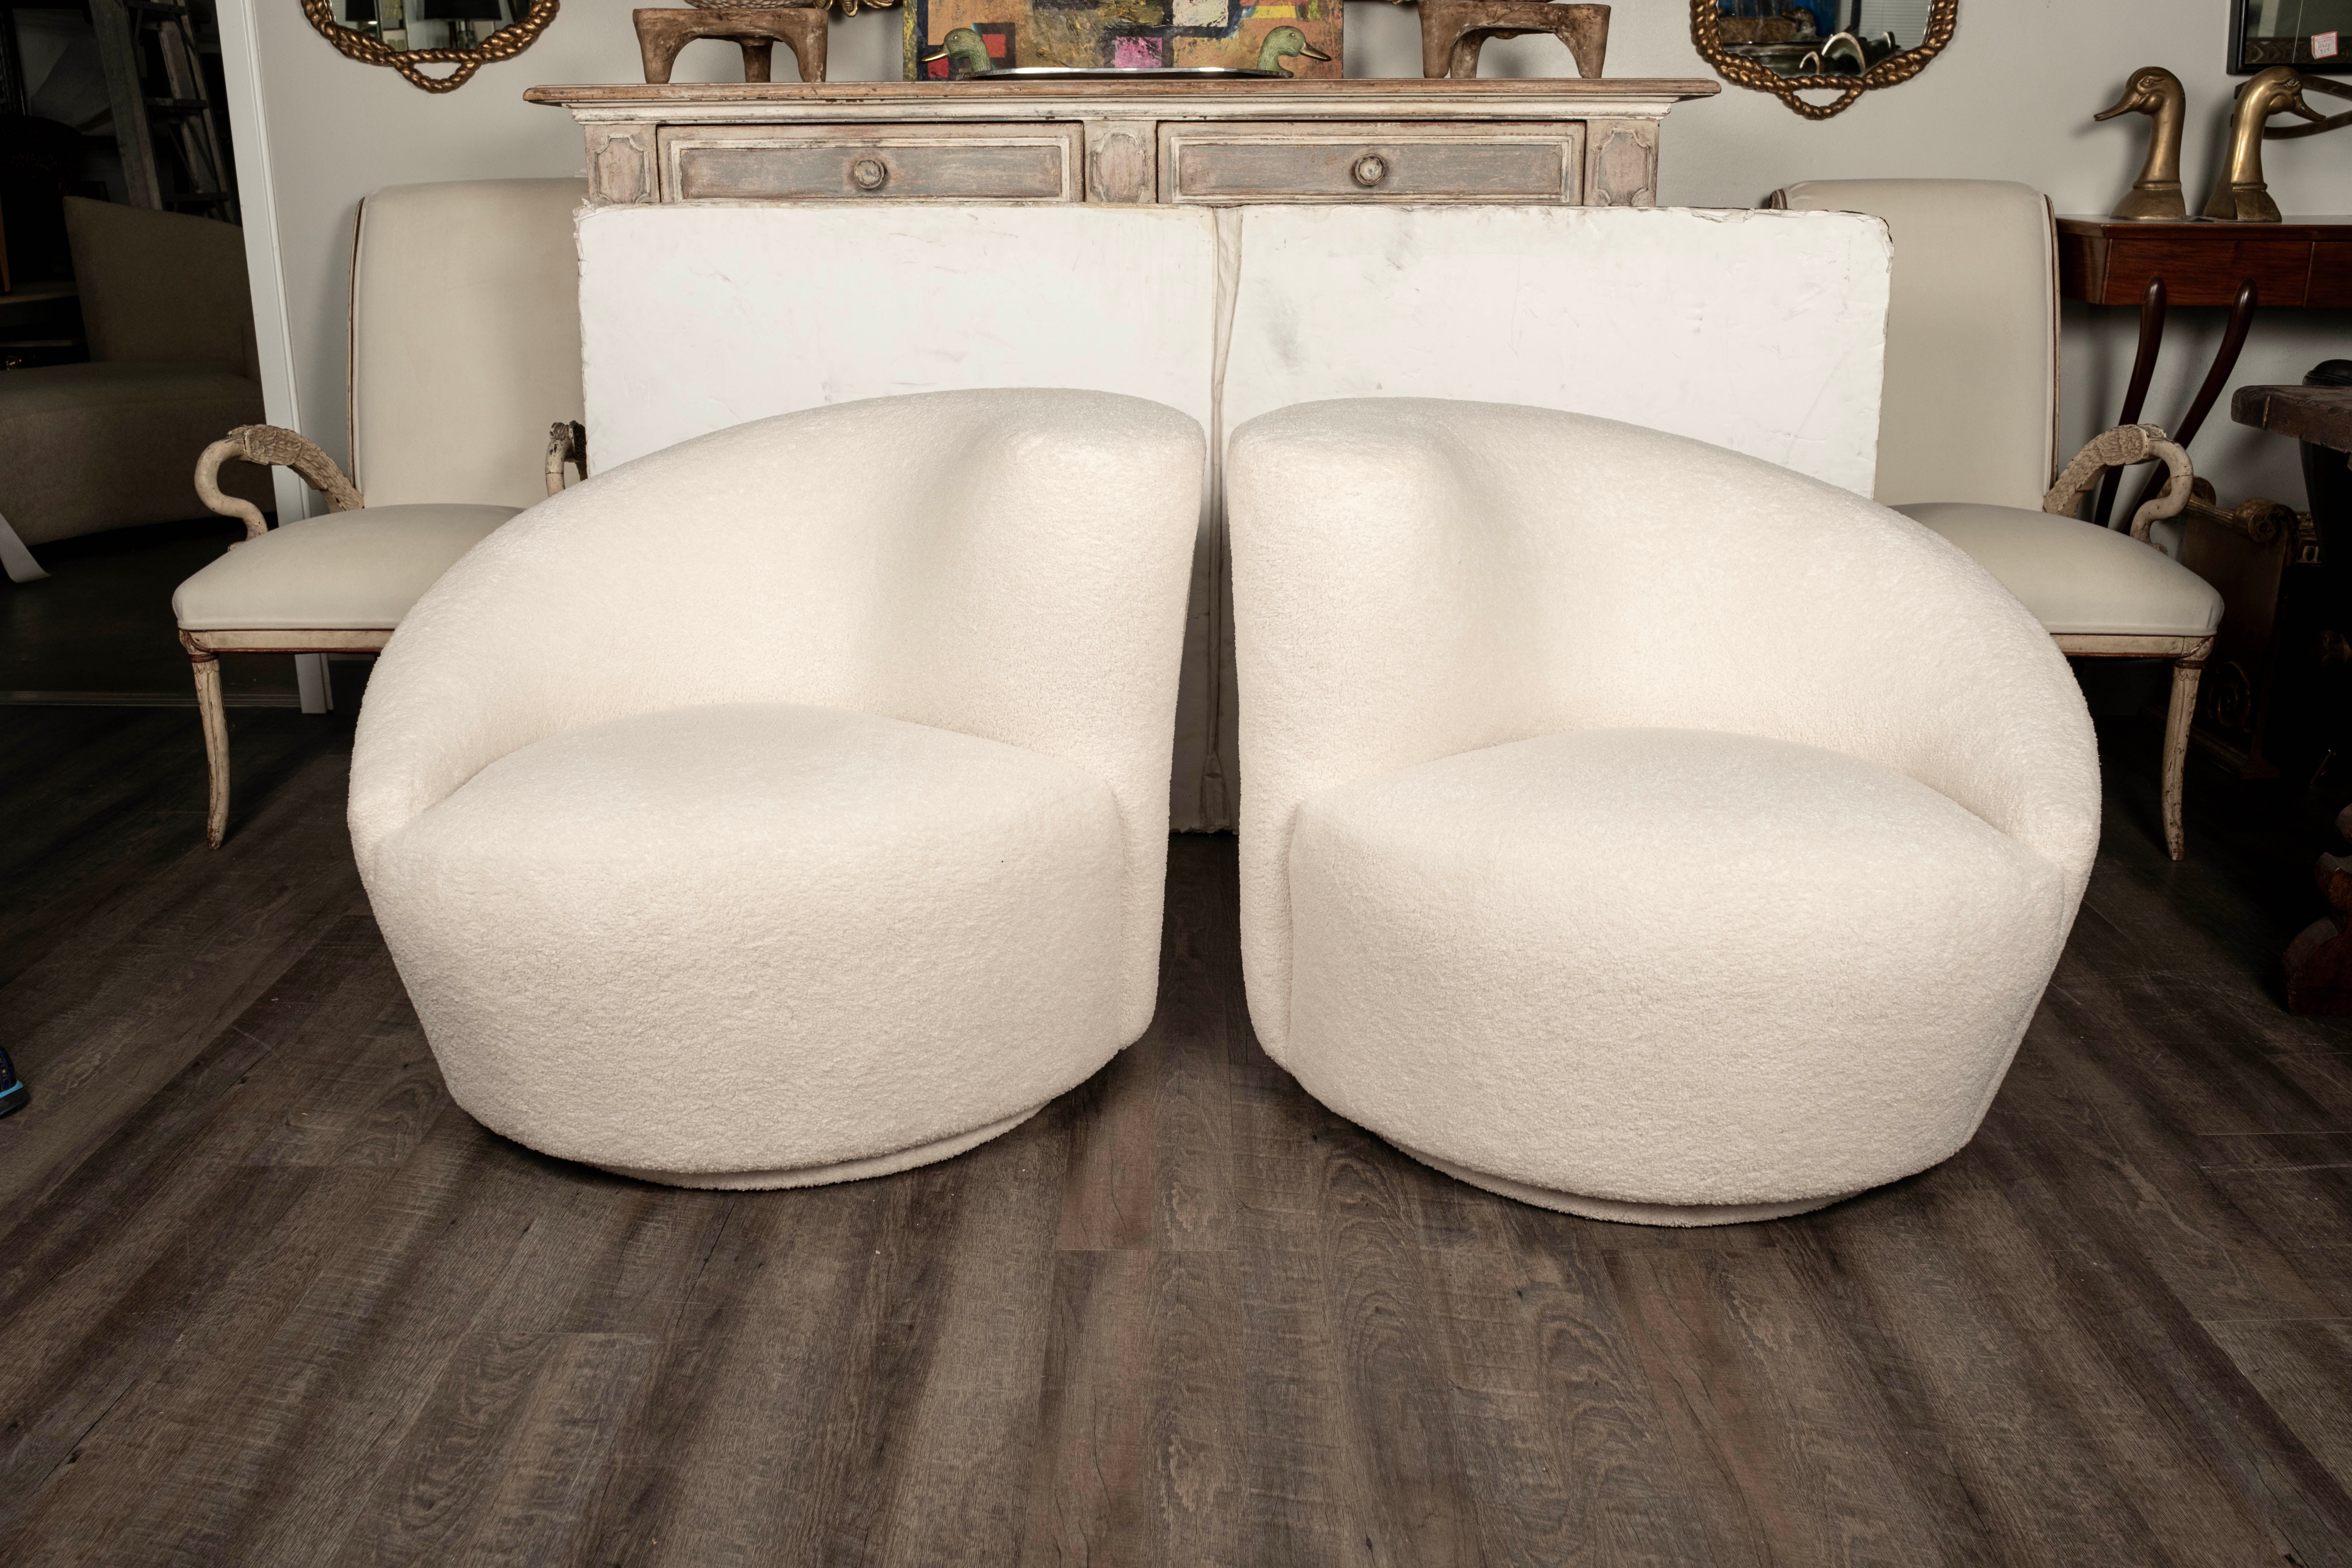 Outstanding pair of Vladimir Kagan for Directional Style Nautilus swivel chairs. This stunning true opposing pair of Kagan Postmodern Nautilus swivel chairs or corkscrew swivel chairs have been professionally upholstered in premium white boucle